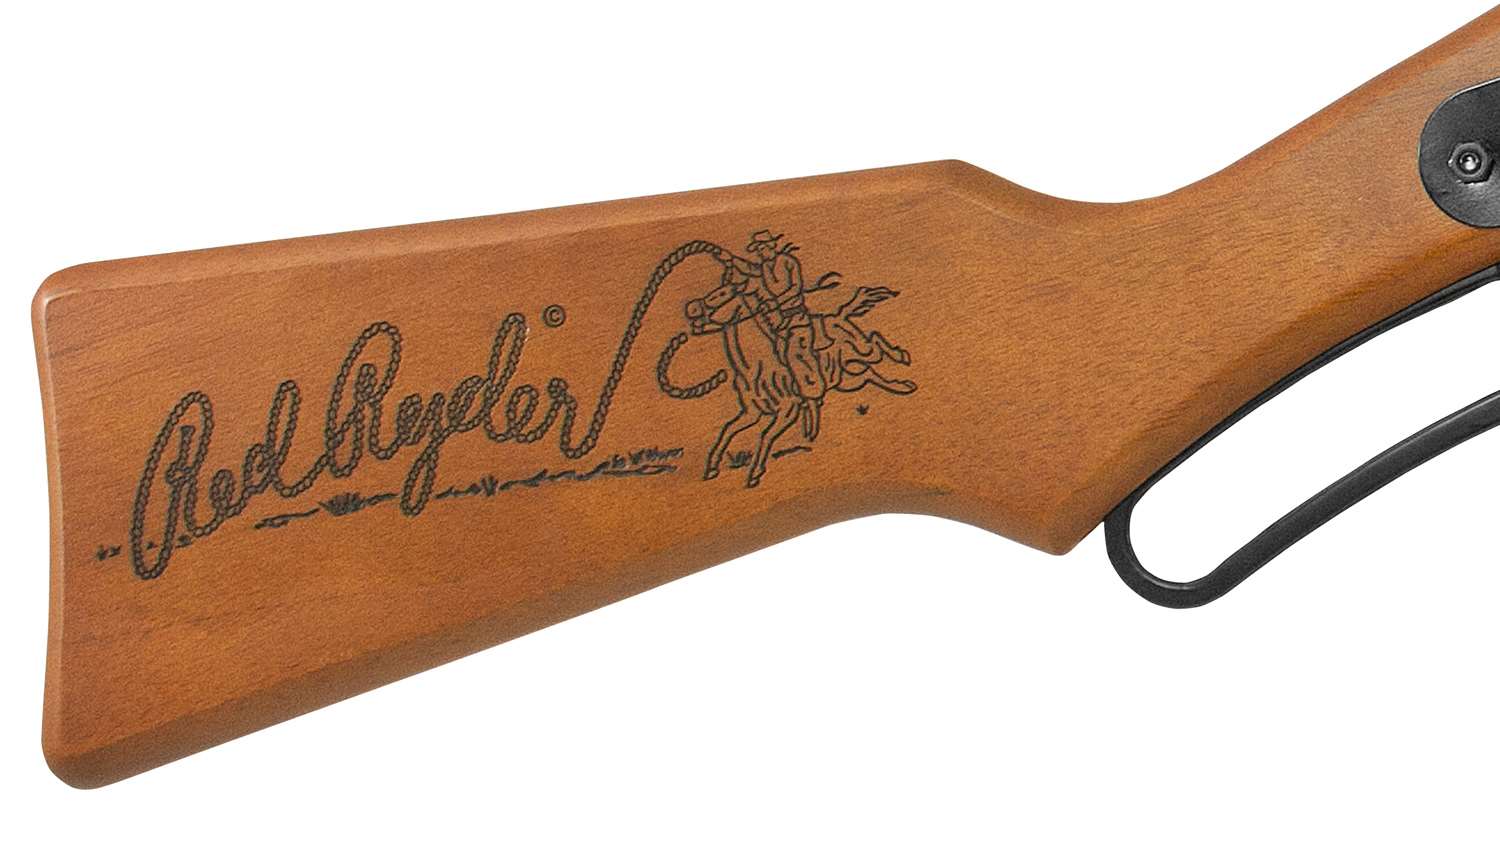 Classic Red Ryder engraving on new adult-sized version of cherished BB Gun